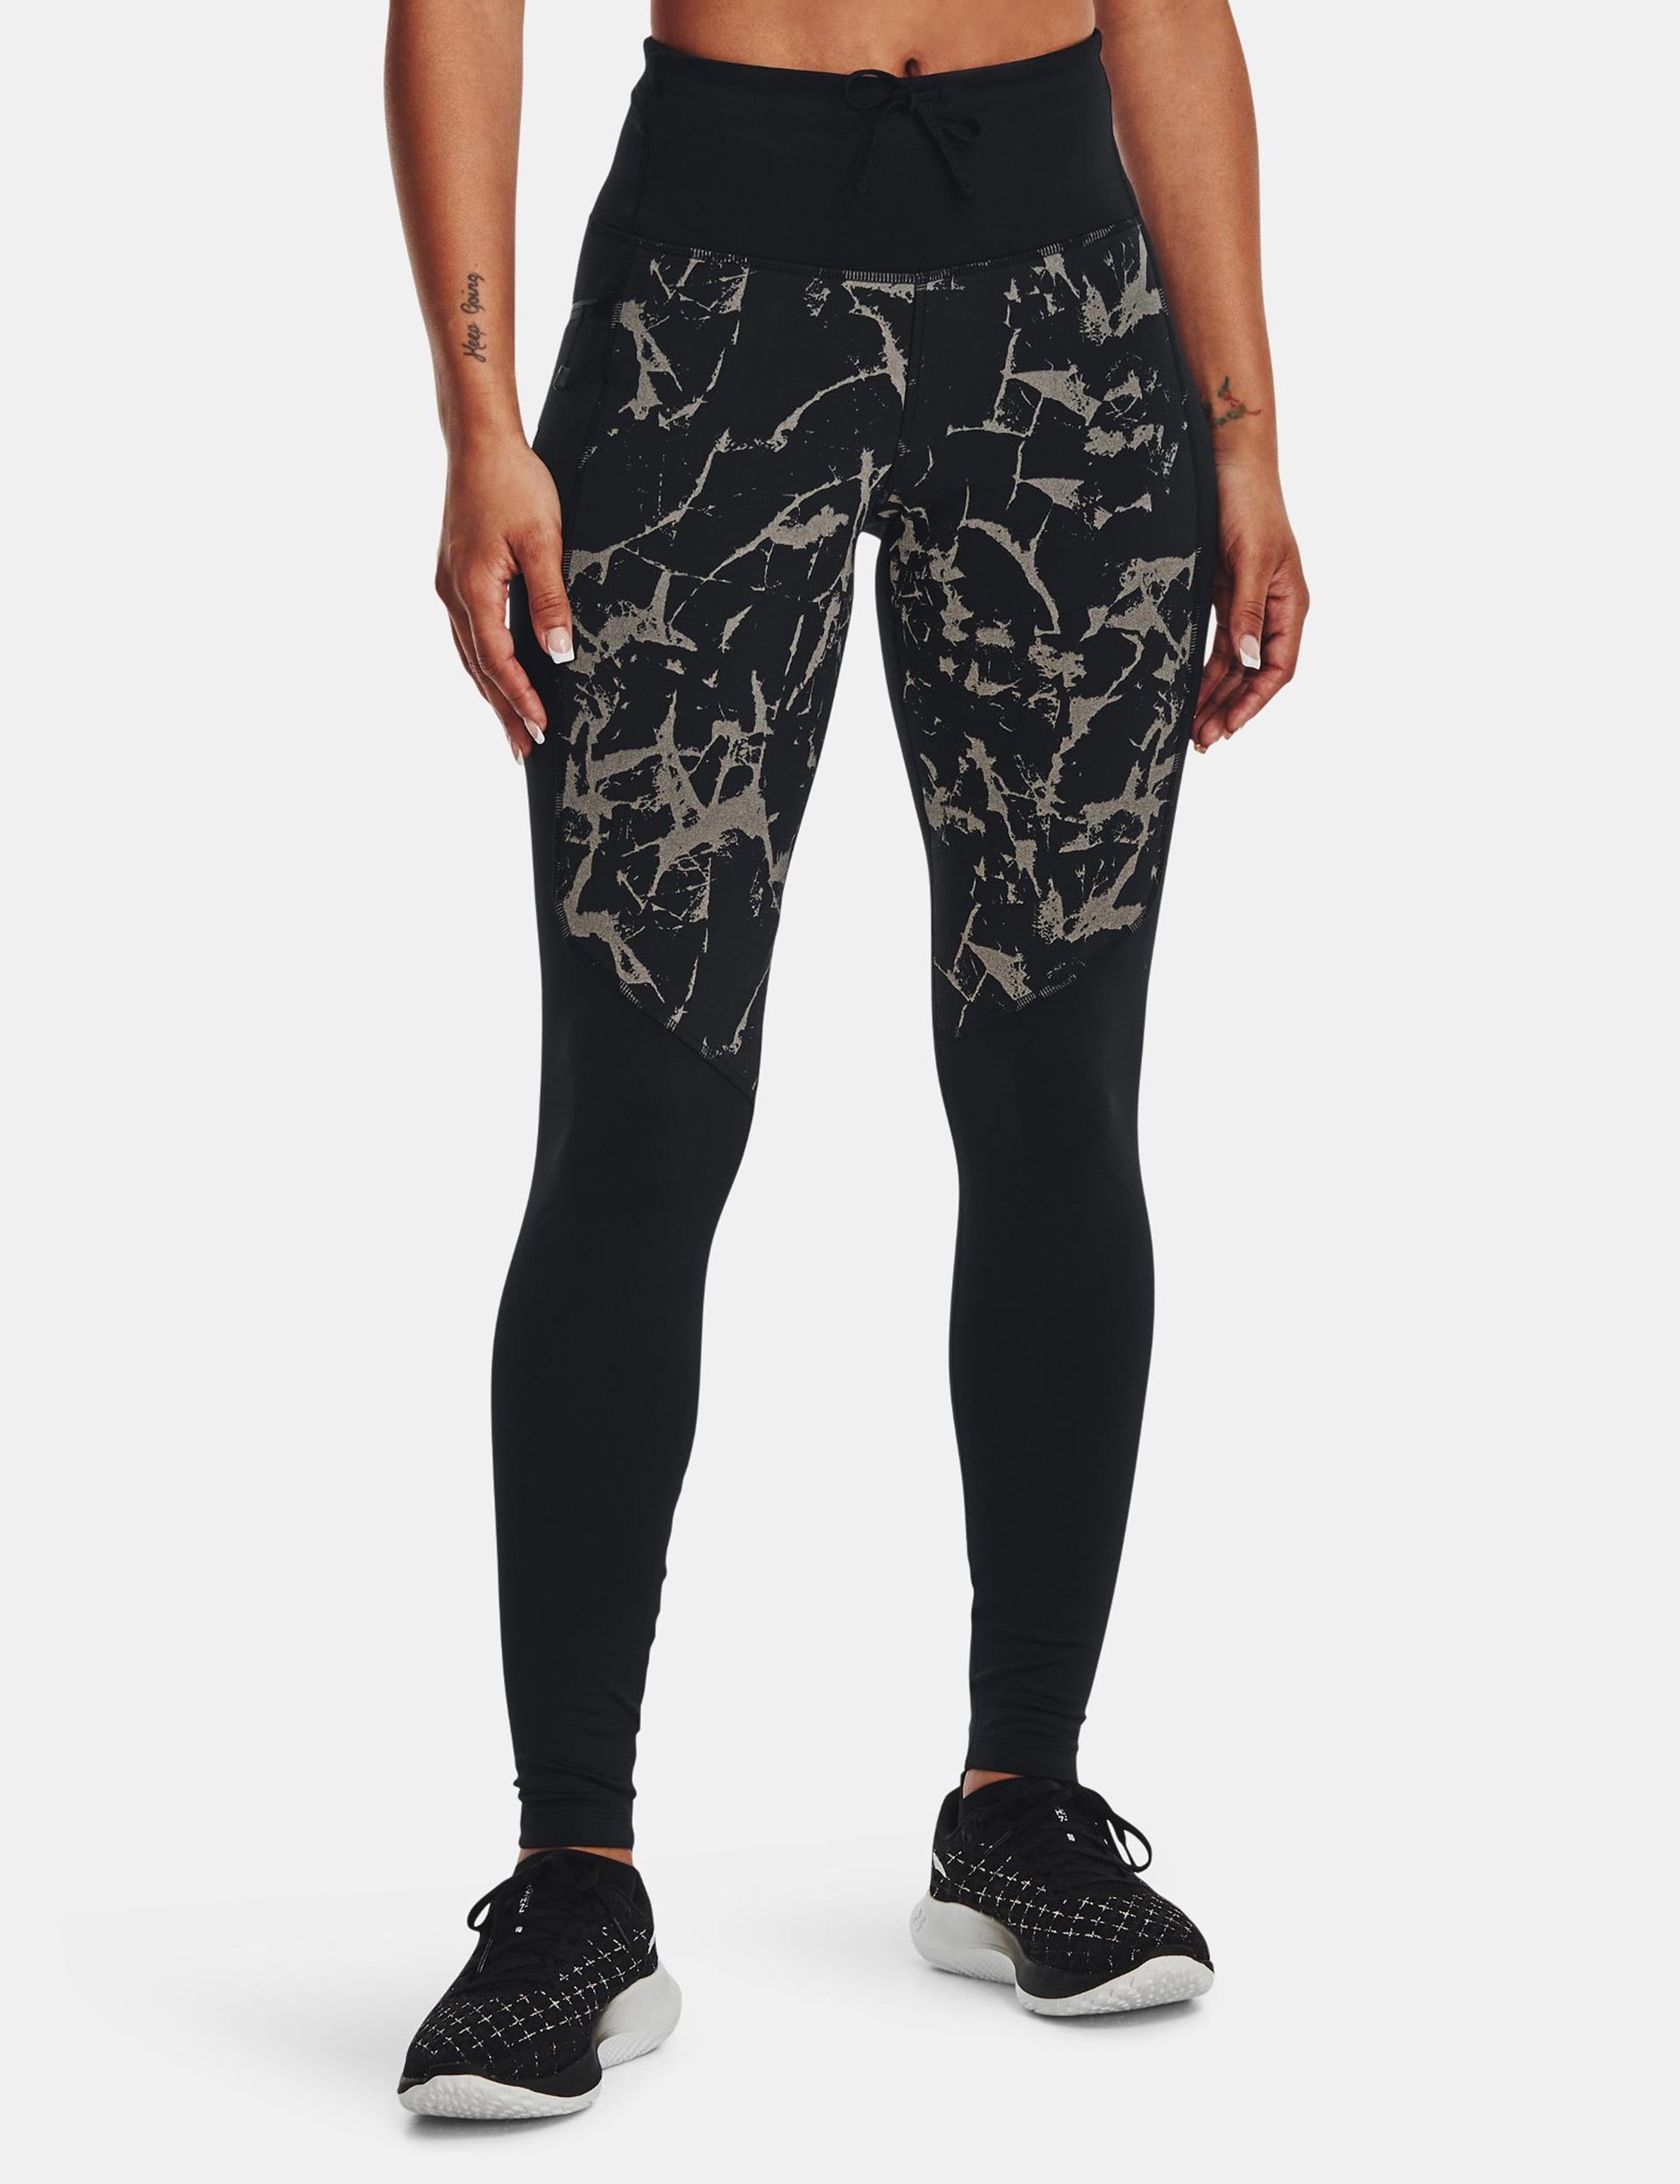 Under Armour OutRun The Cold Tights - Black/Reflectiveimage1- The Sports Edit